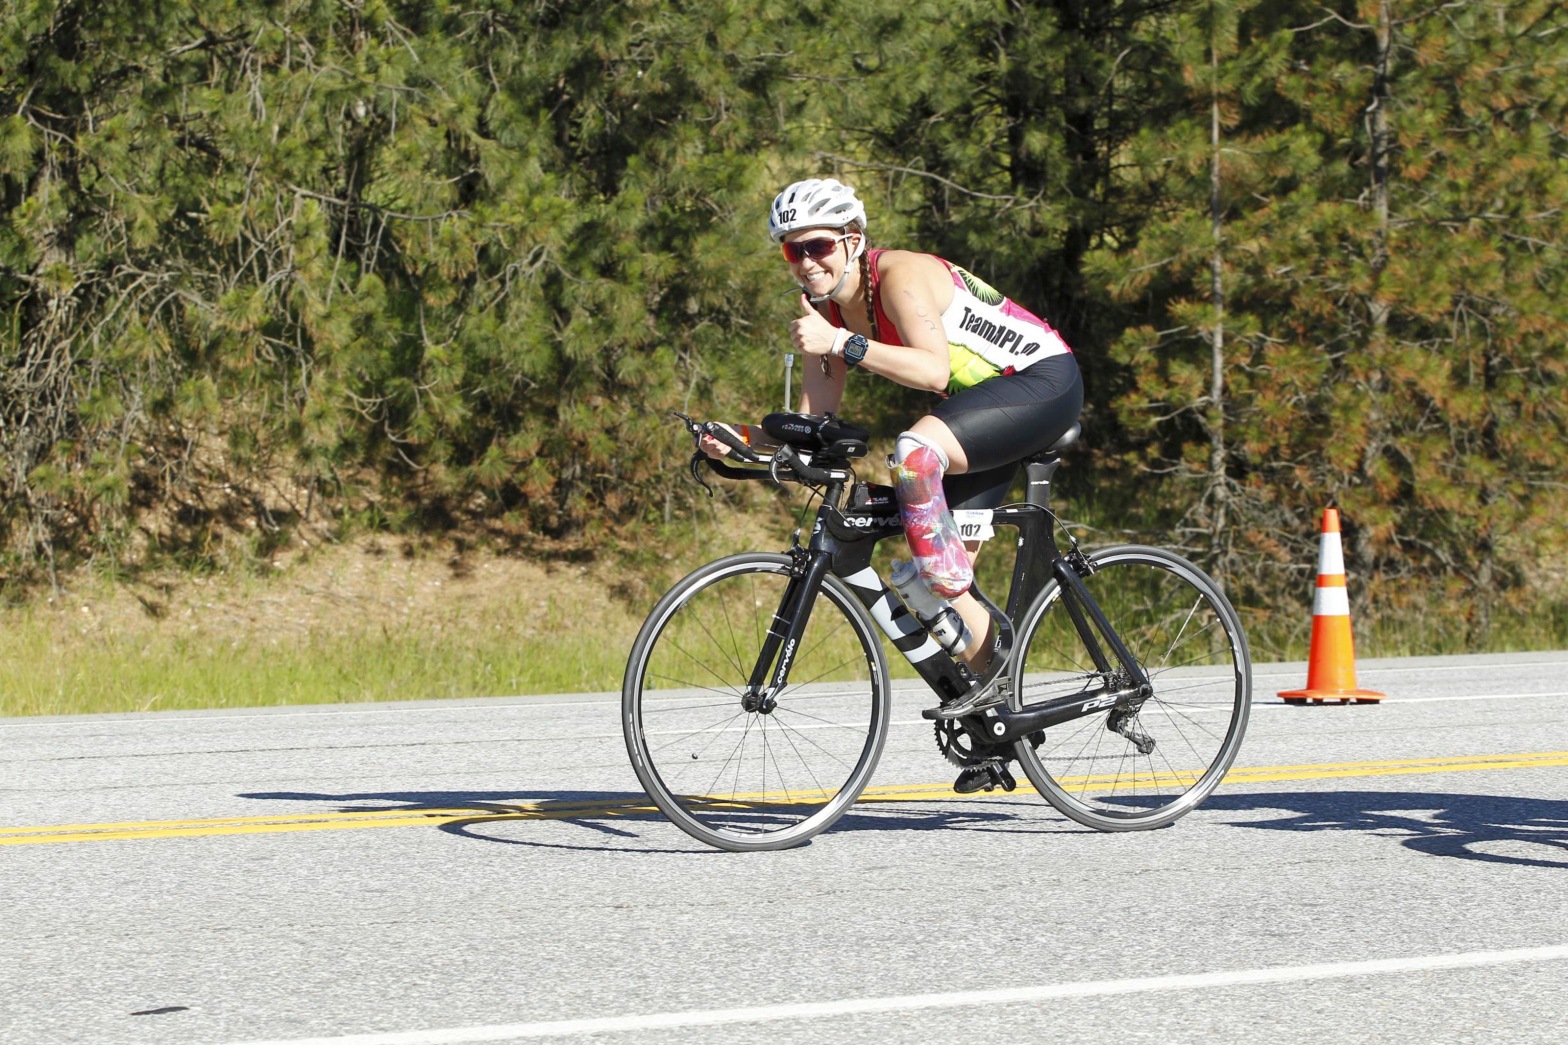 Emily on her bike giving the camera a thumb's up while on course at IM70.3 Coeur d'Alene in June of 2016